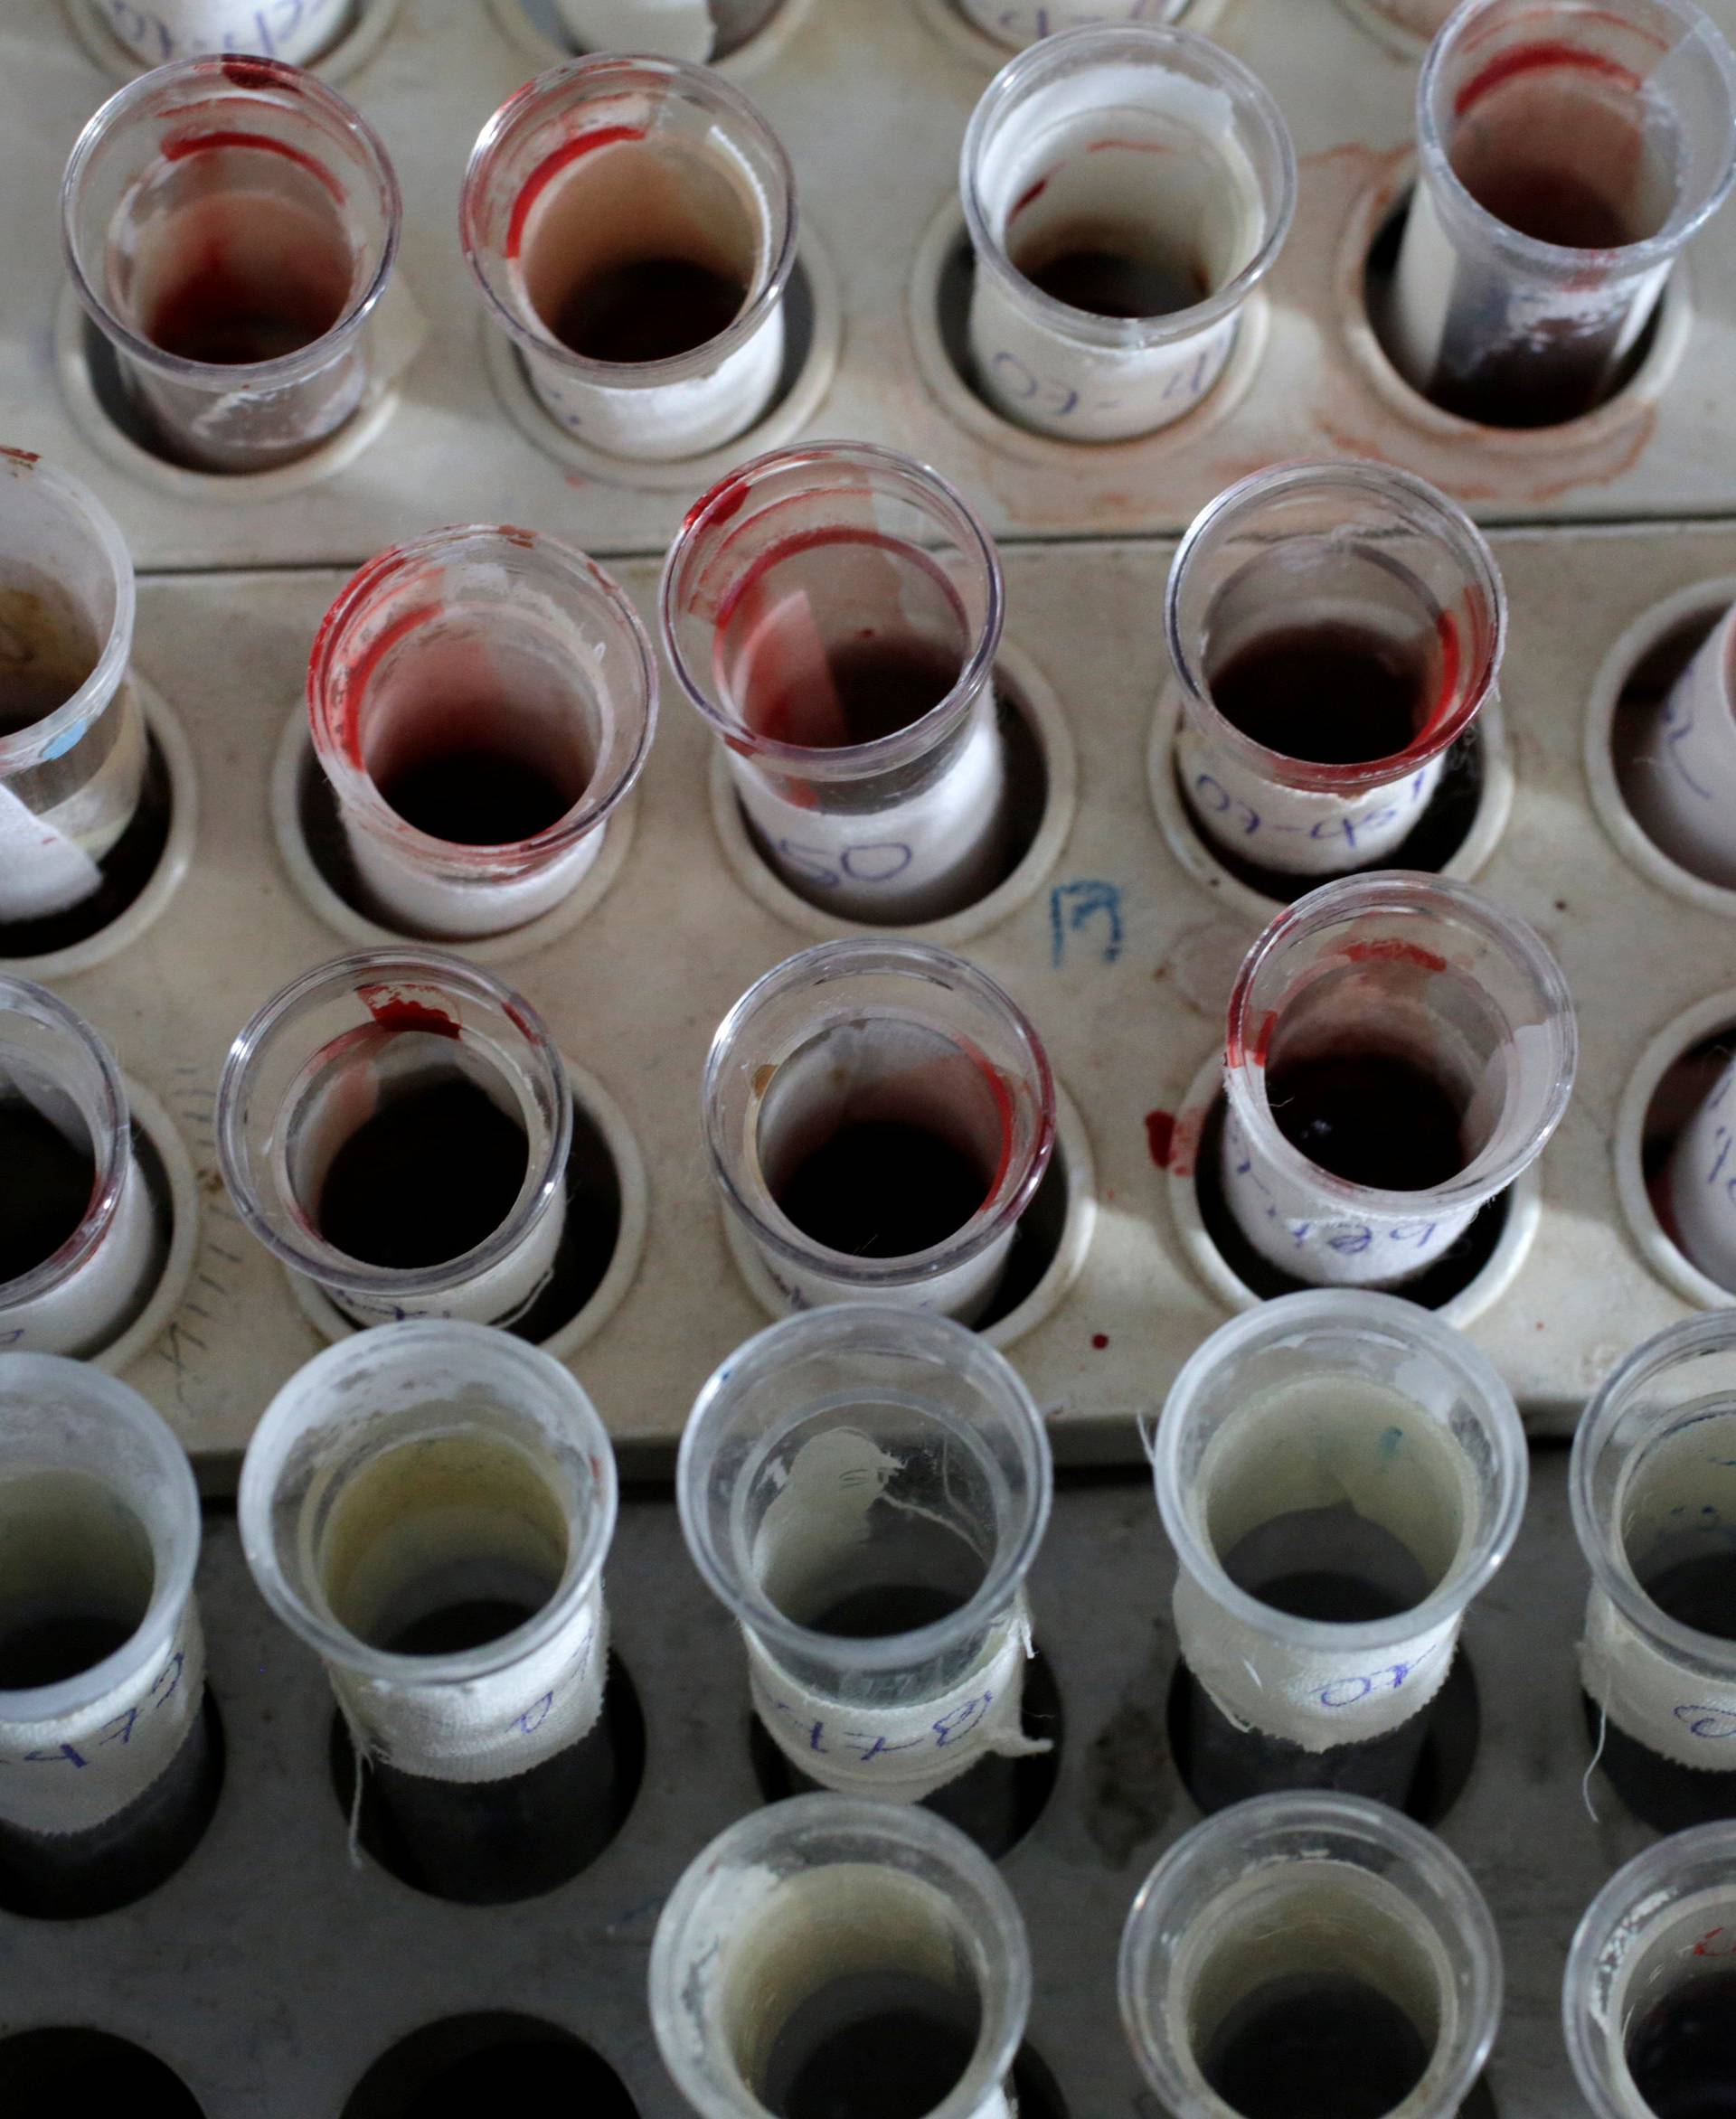 Testing tubes full of blood are seen during a blood donation at a school as part of the celebrations for Cuba's former President Fidel Castro's upcoming 90th birthday in Artemisa province, Cuba